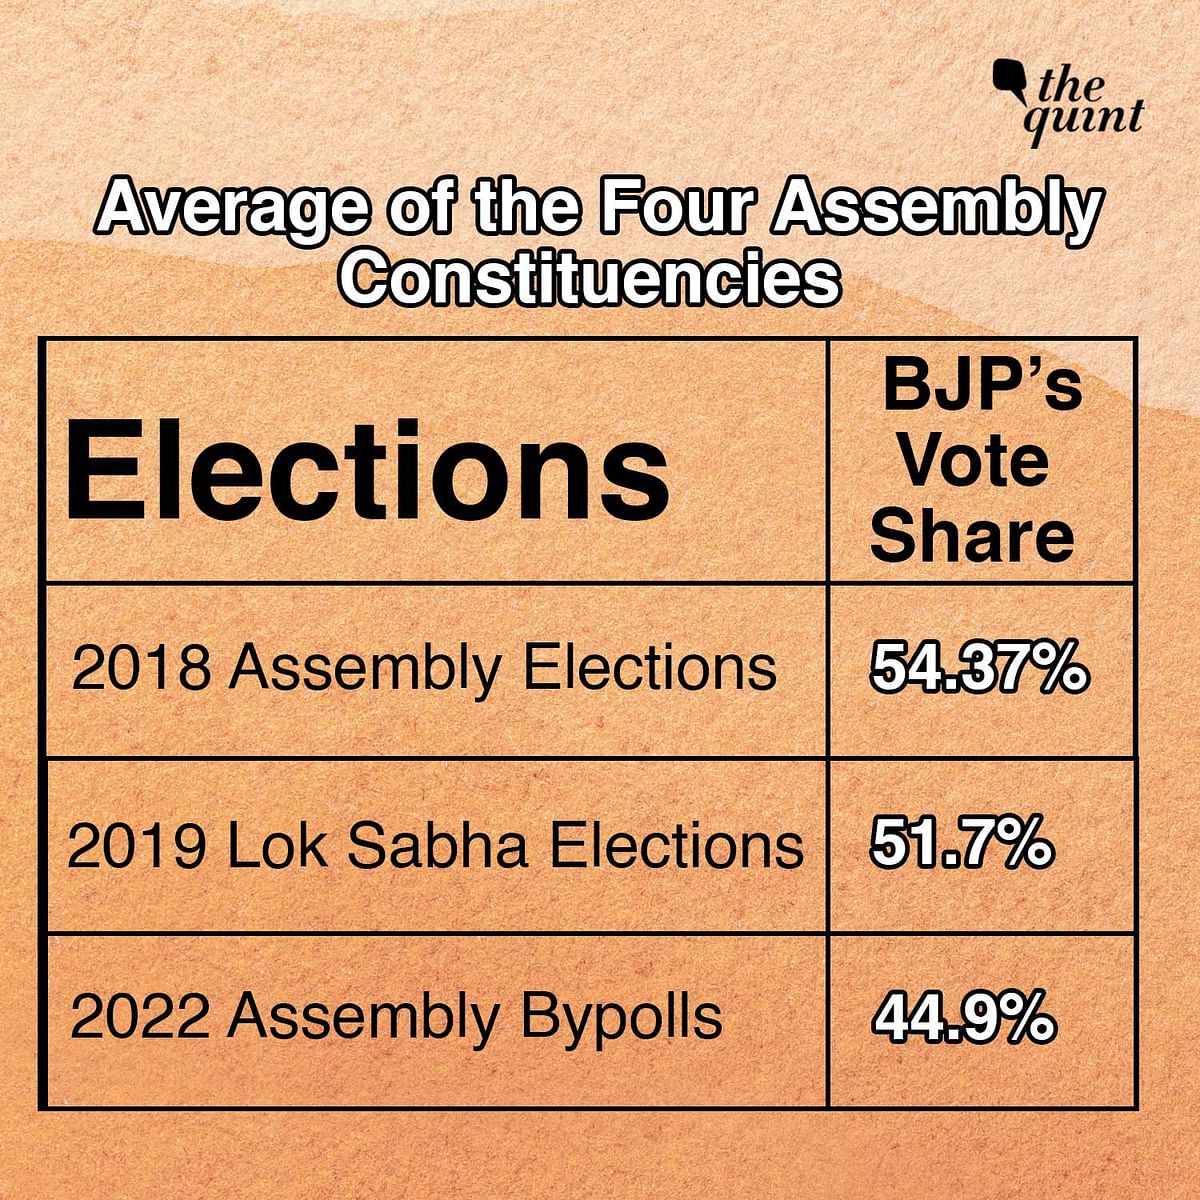 The Tripura bypoll results indicate that the BJP's vote share has dropped compared to the 2018 and 2019 polls.